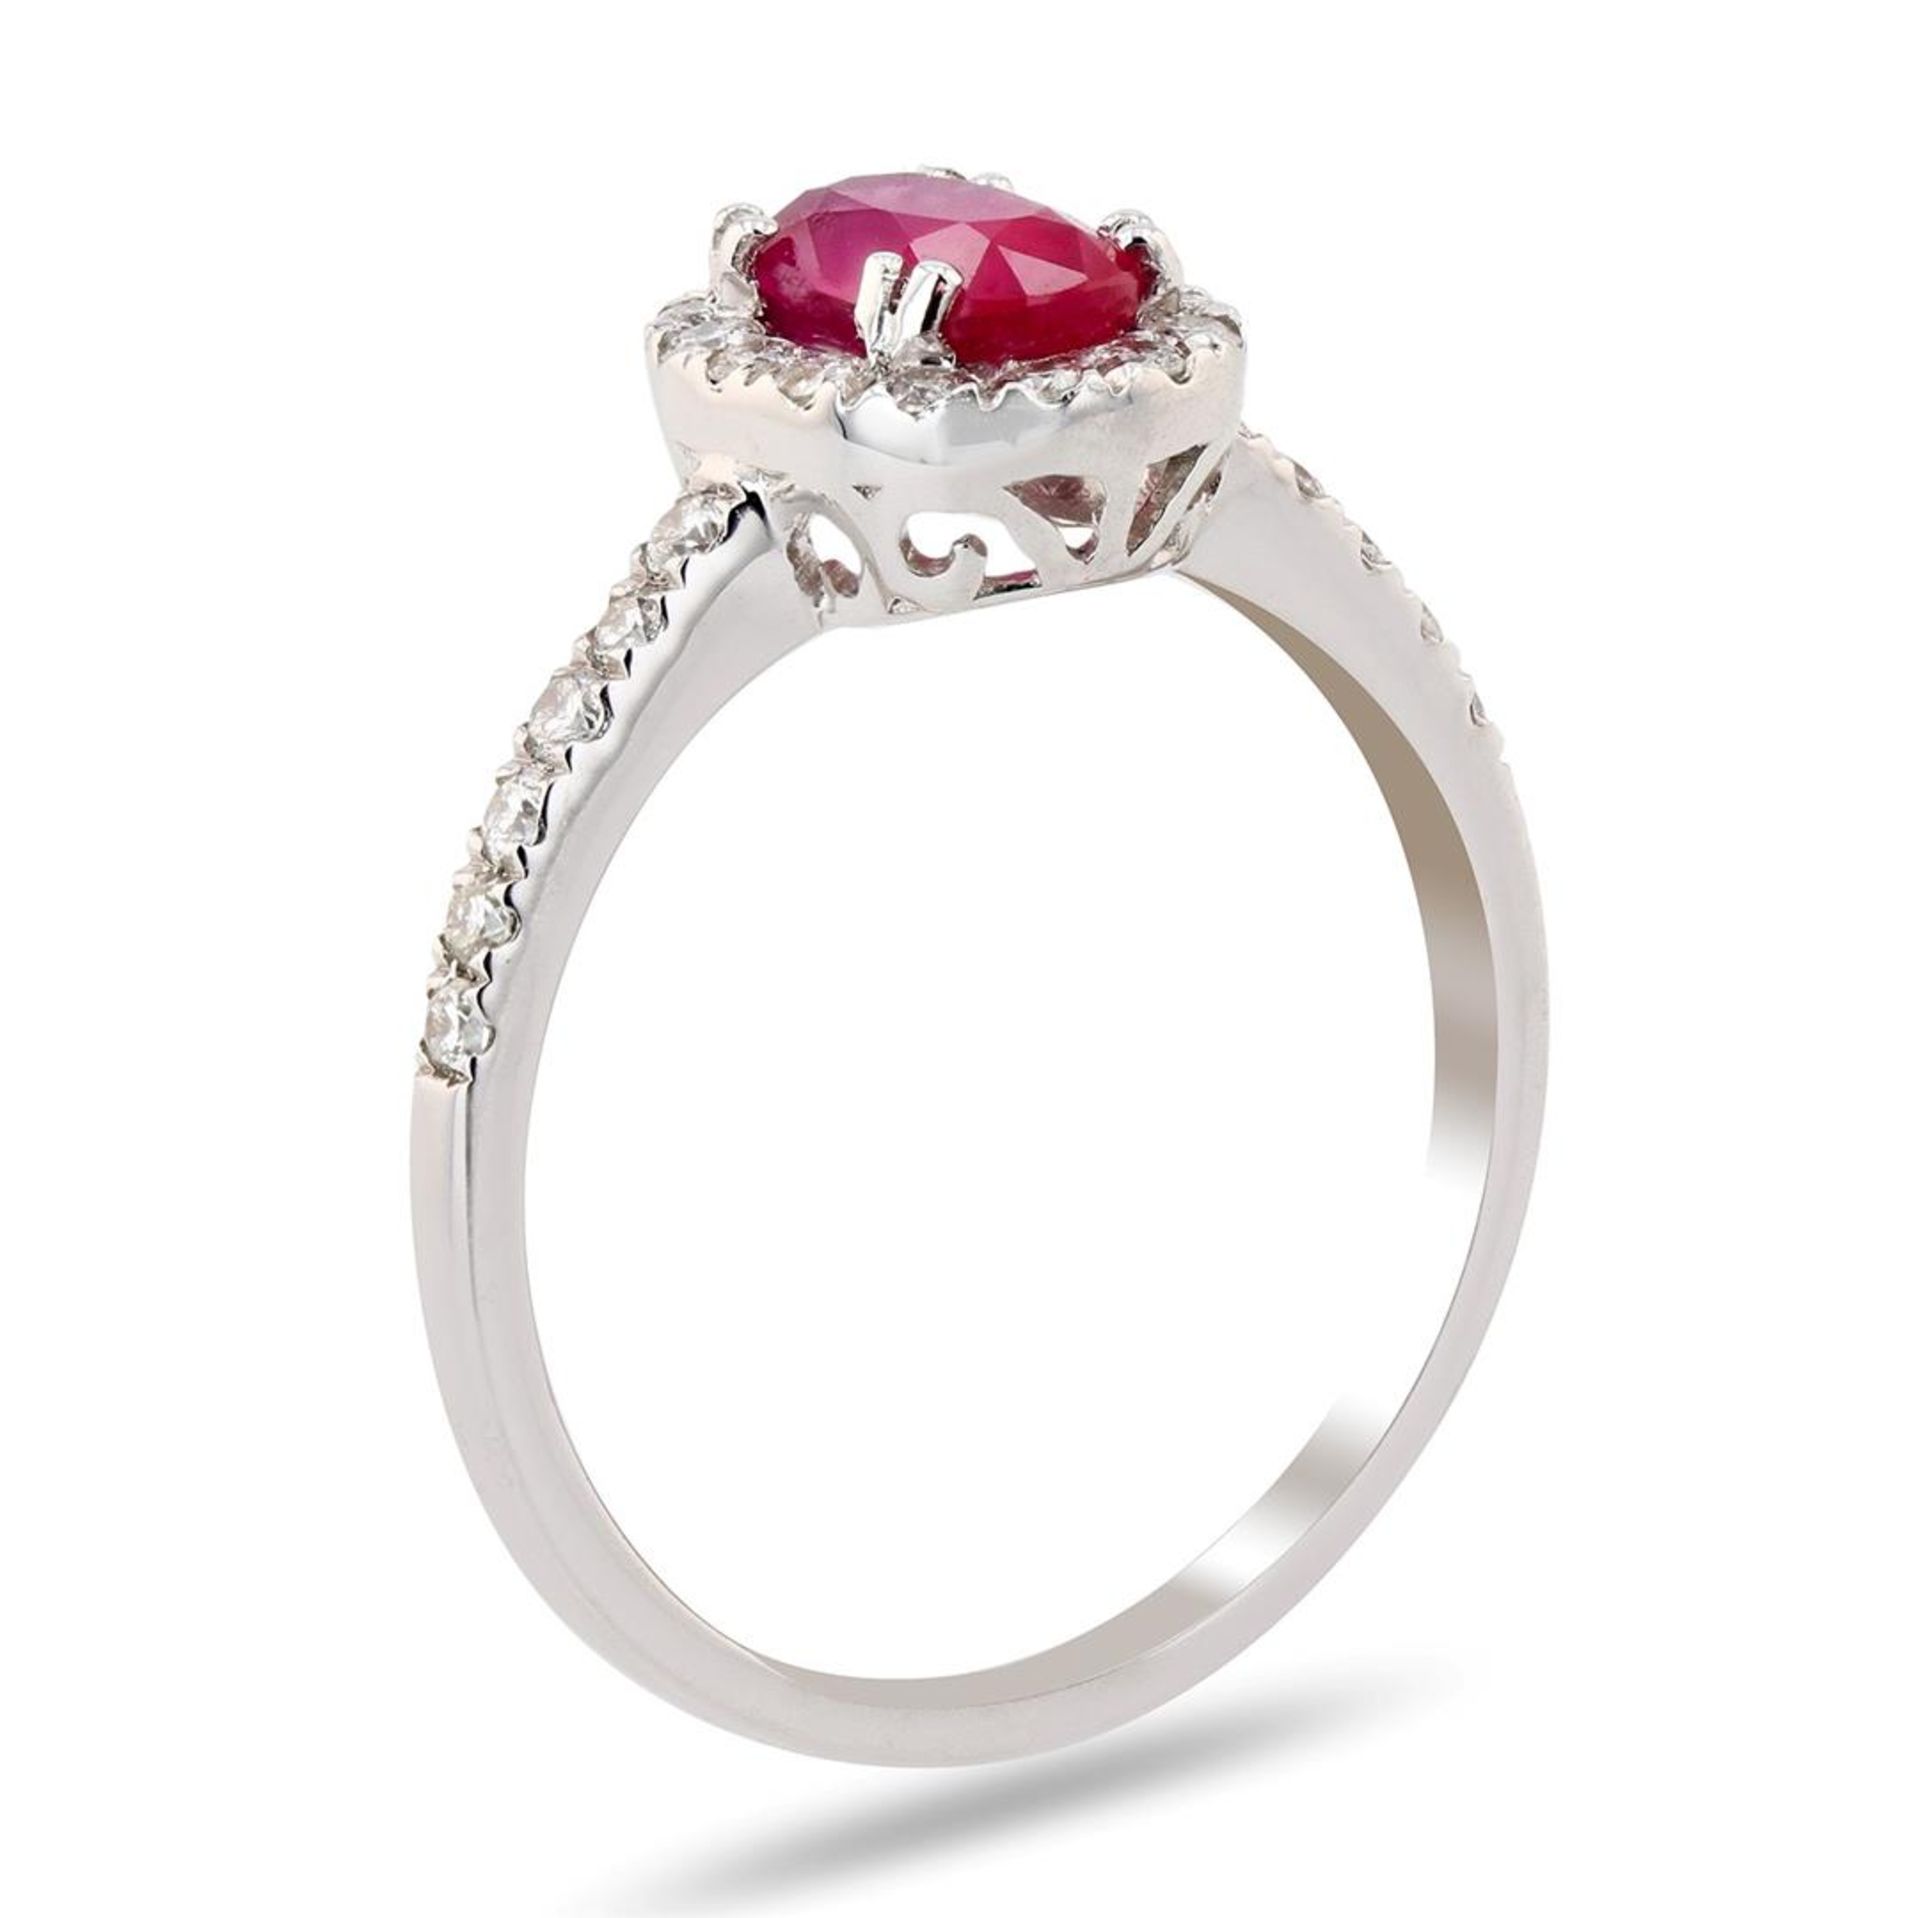 1.06ct Ruby and 0.38ctw Diamond Platinum Ring (GIA CERTIFIED) - Image 2 of 4